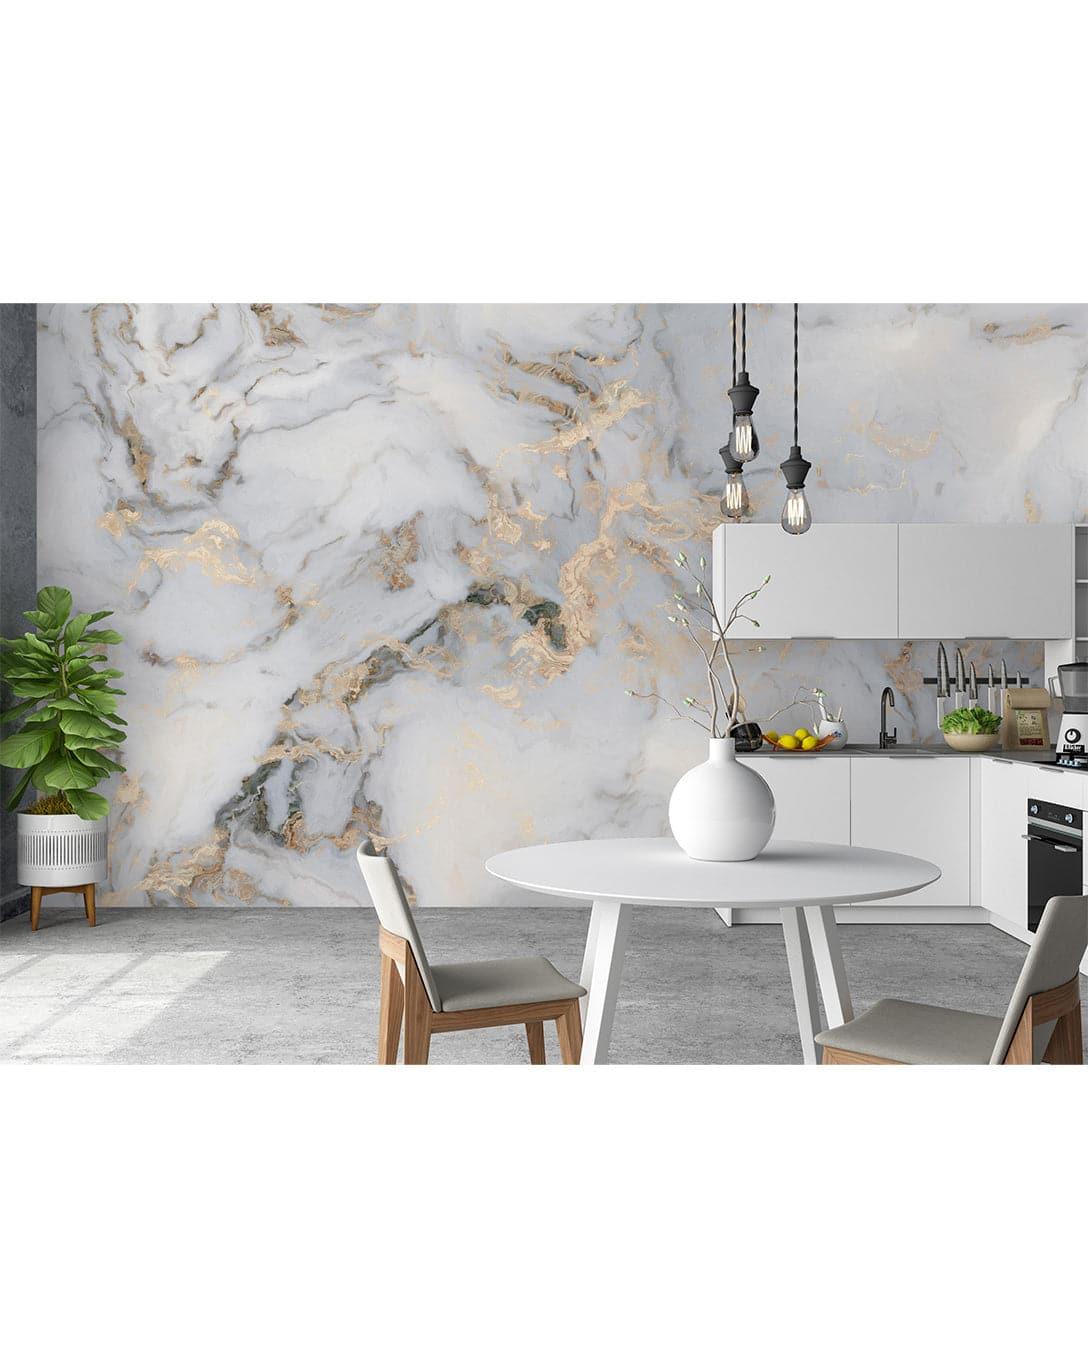 White Gray Gold Marble Paining Stone Wall Decal White Gray Gold Marble Paining Stone Wall Decal 